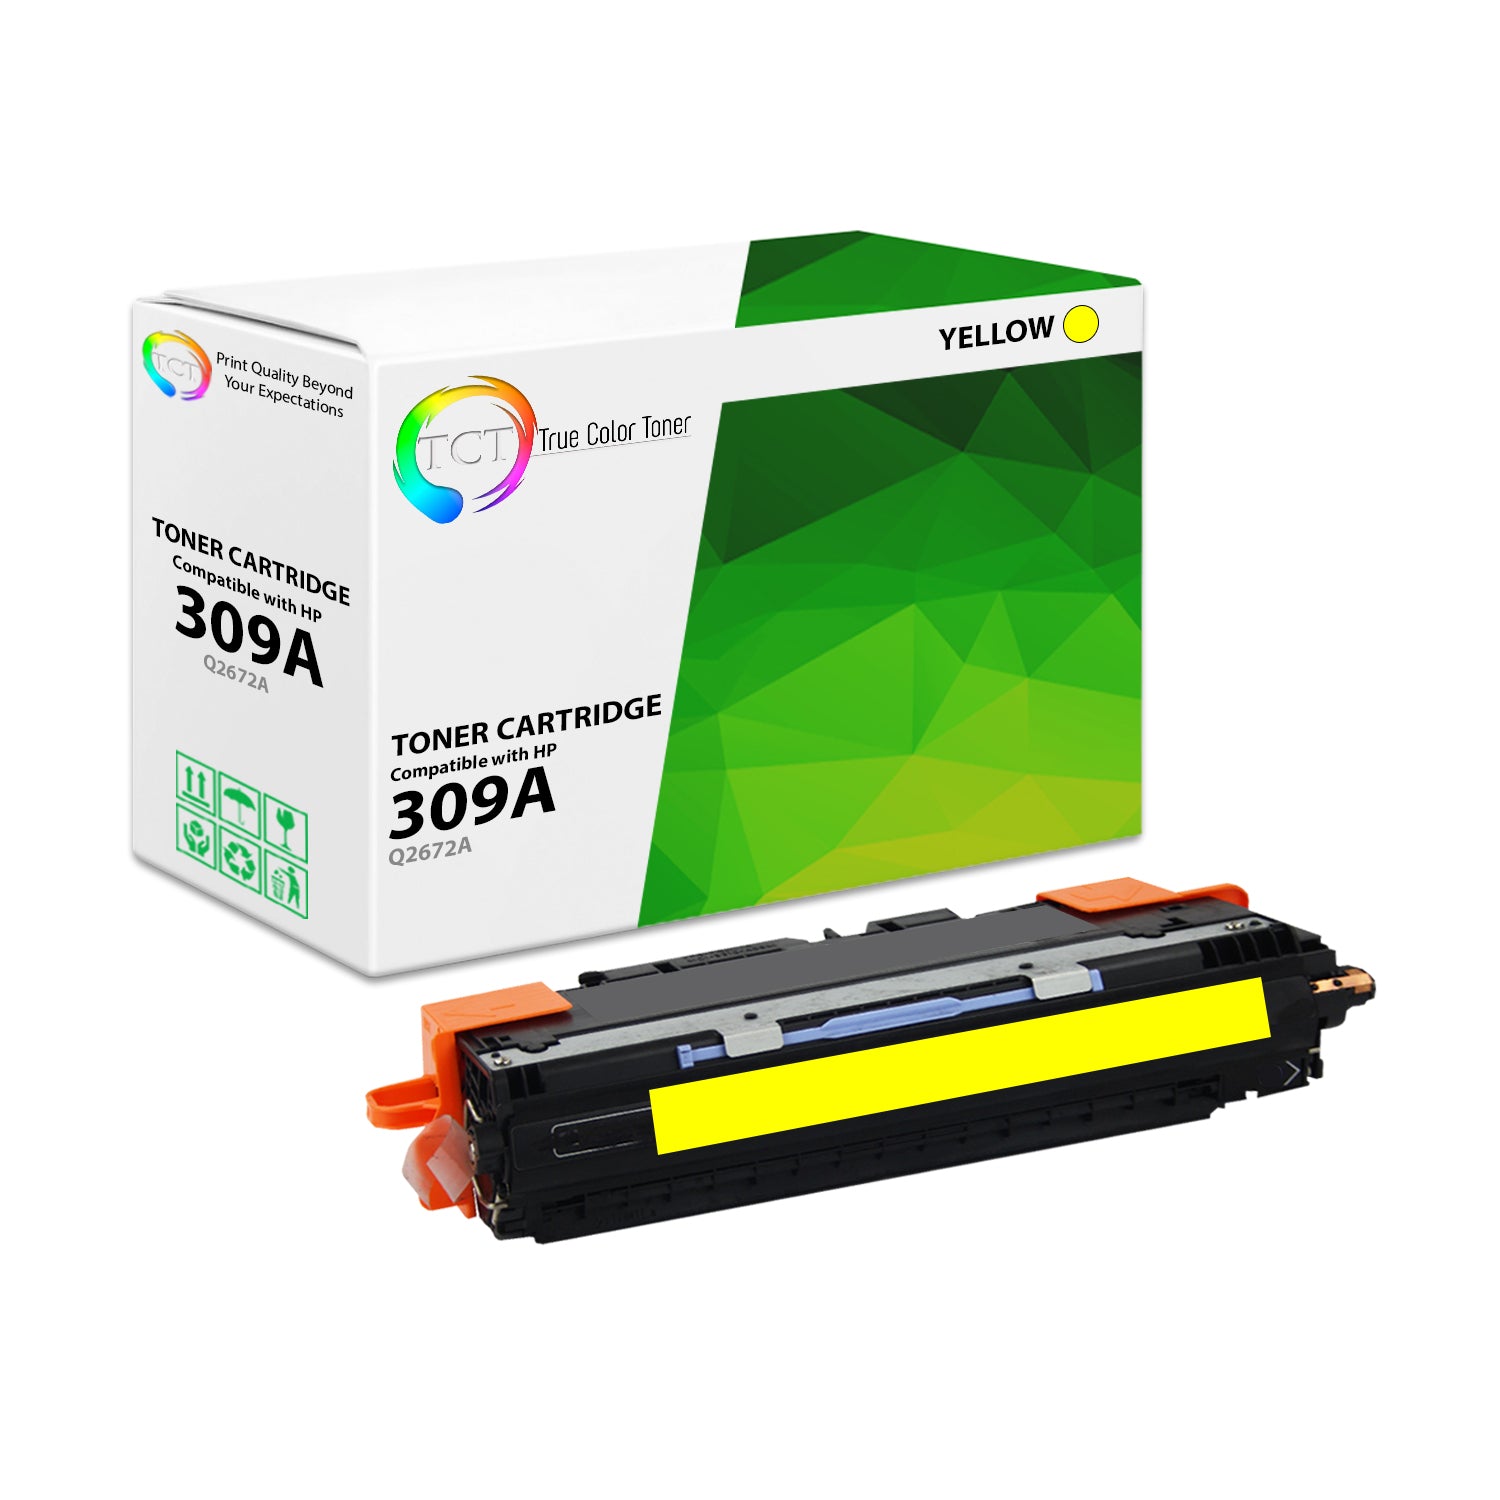 TCT Compatible Toner Cartridge Replacement for the HP 309A Series - 1 Pack Yellow